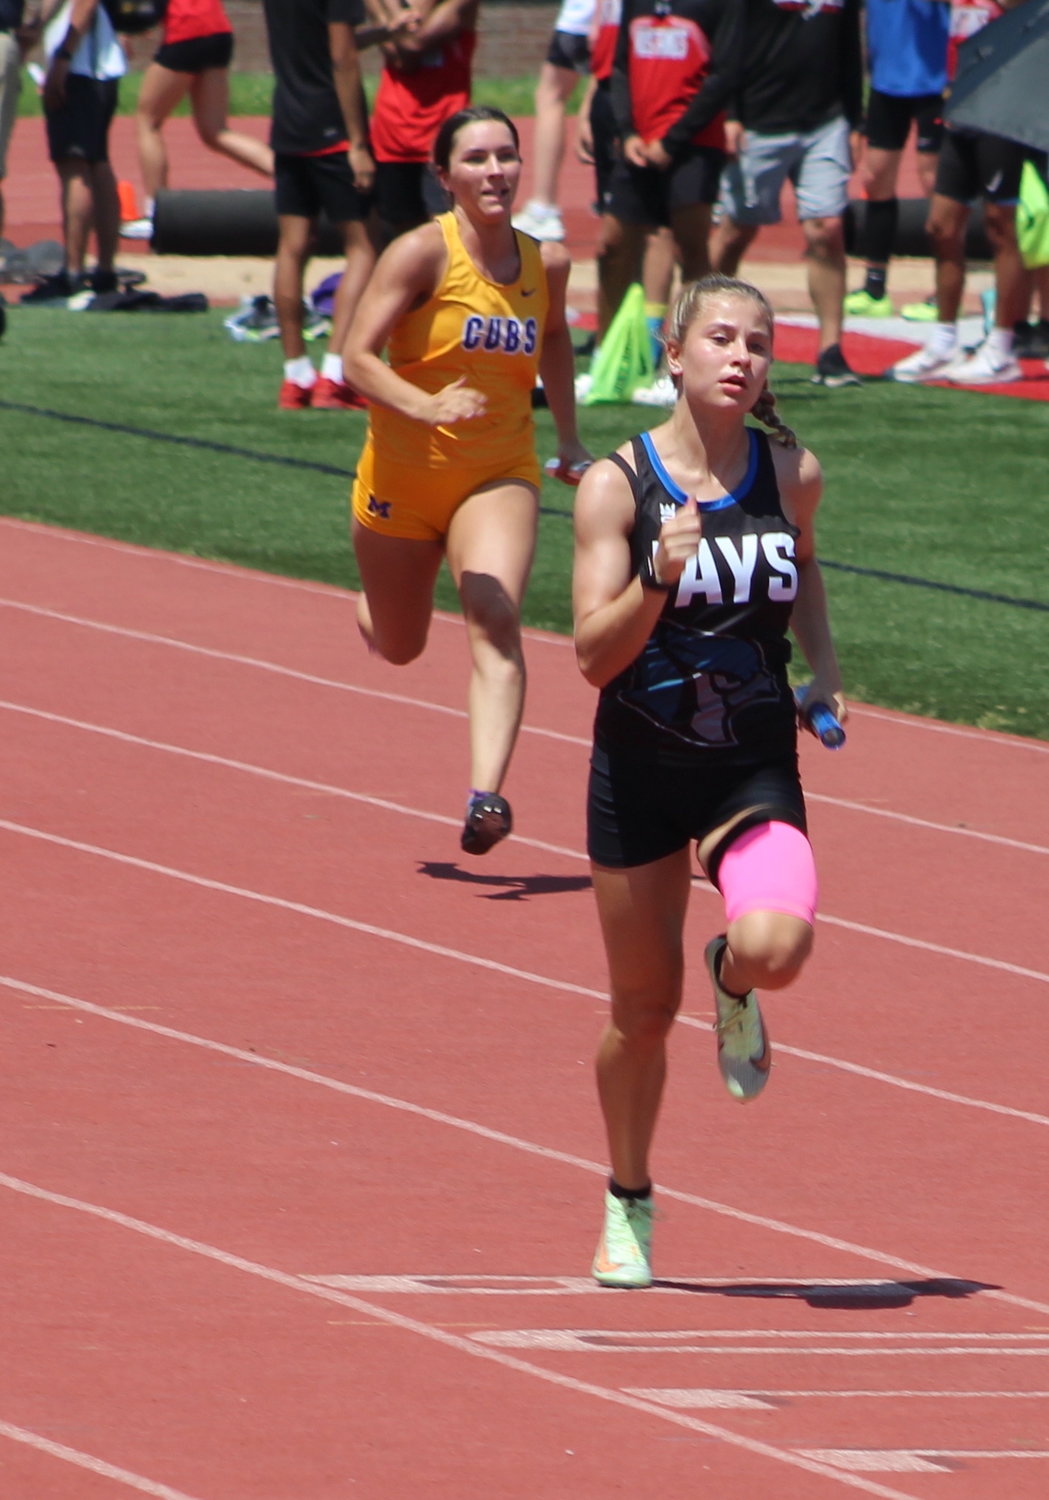 Junior Emma Dinkins finishes 1st for Lady Jays 4x100M at Class 4 District Championship. The 4x100M is composed of Dinkins, Ruby Joiner, Abby McBride and Cassie Fishel. Dinkins and Fishel are both headed to Class 4 Sectional 3 in the 100M and 200M.